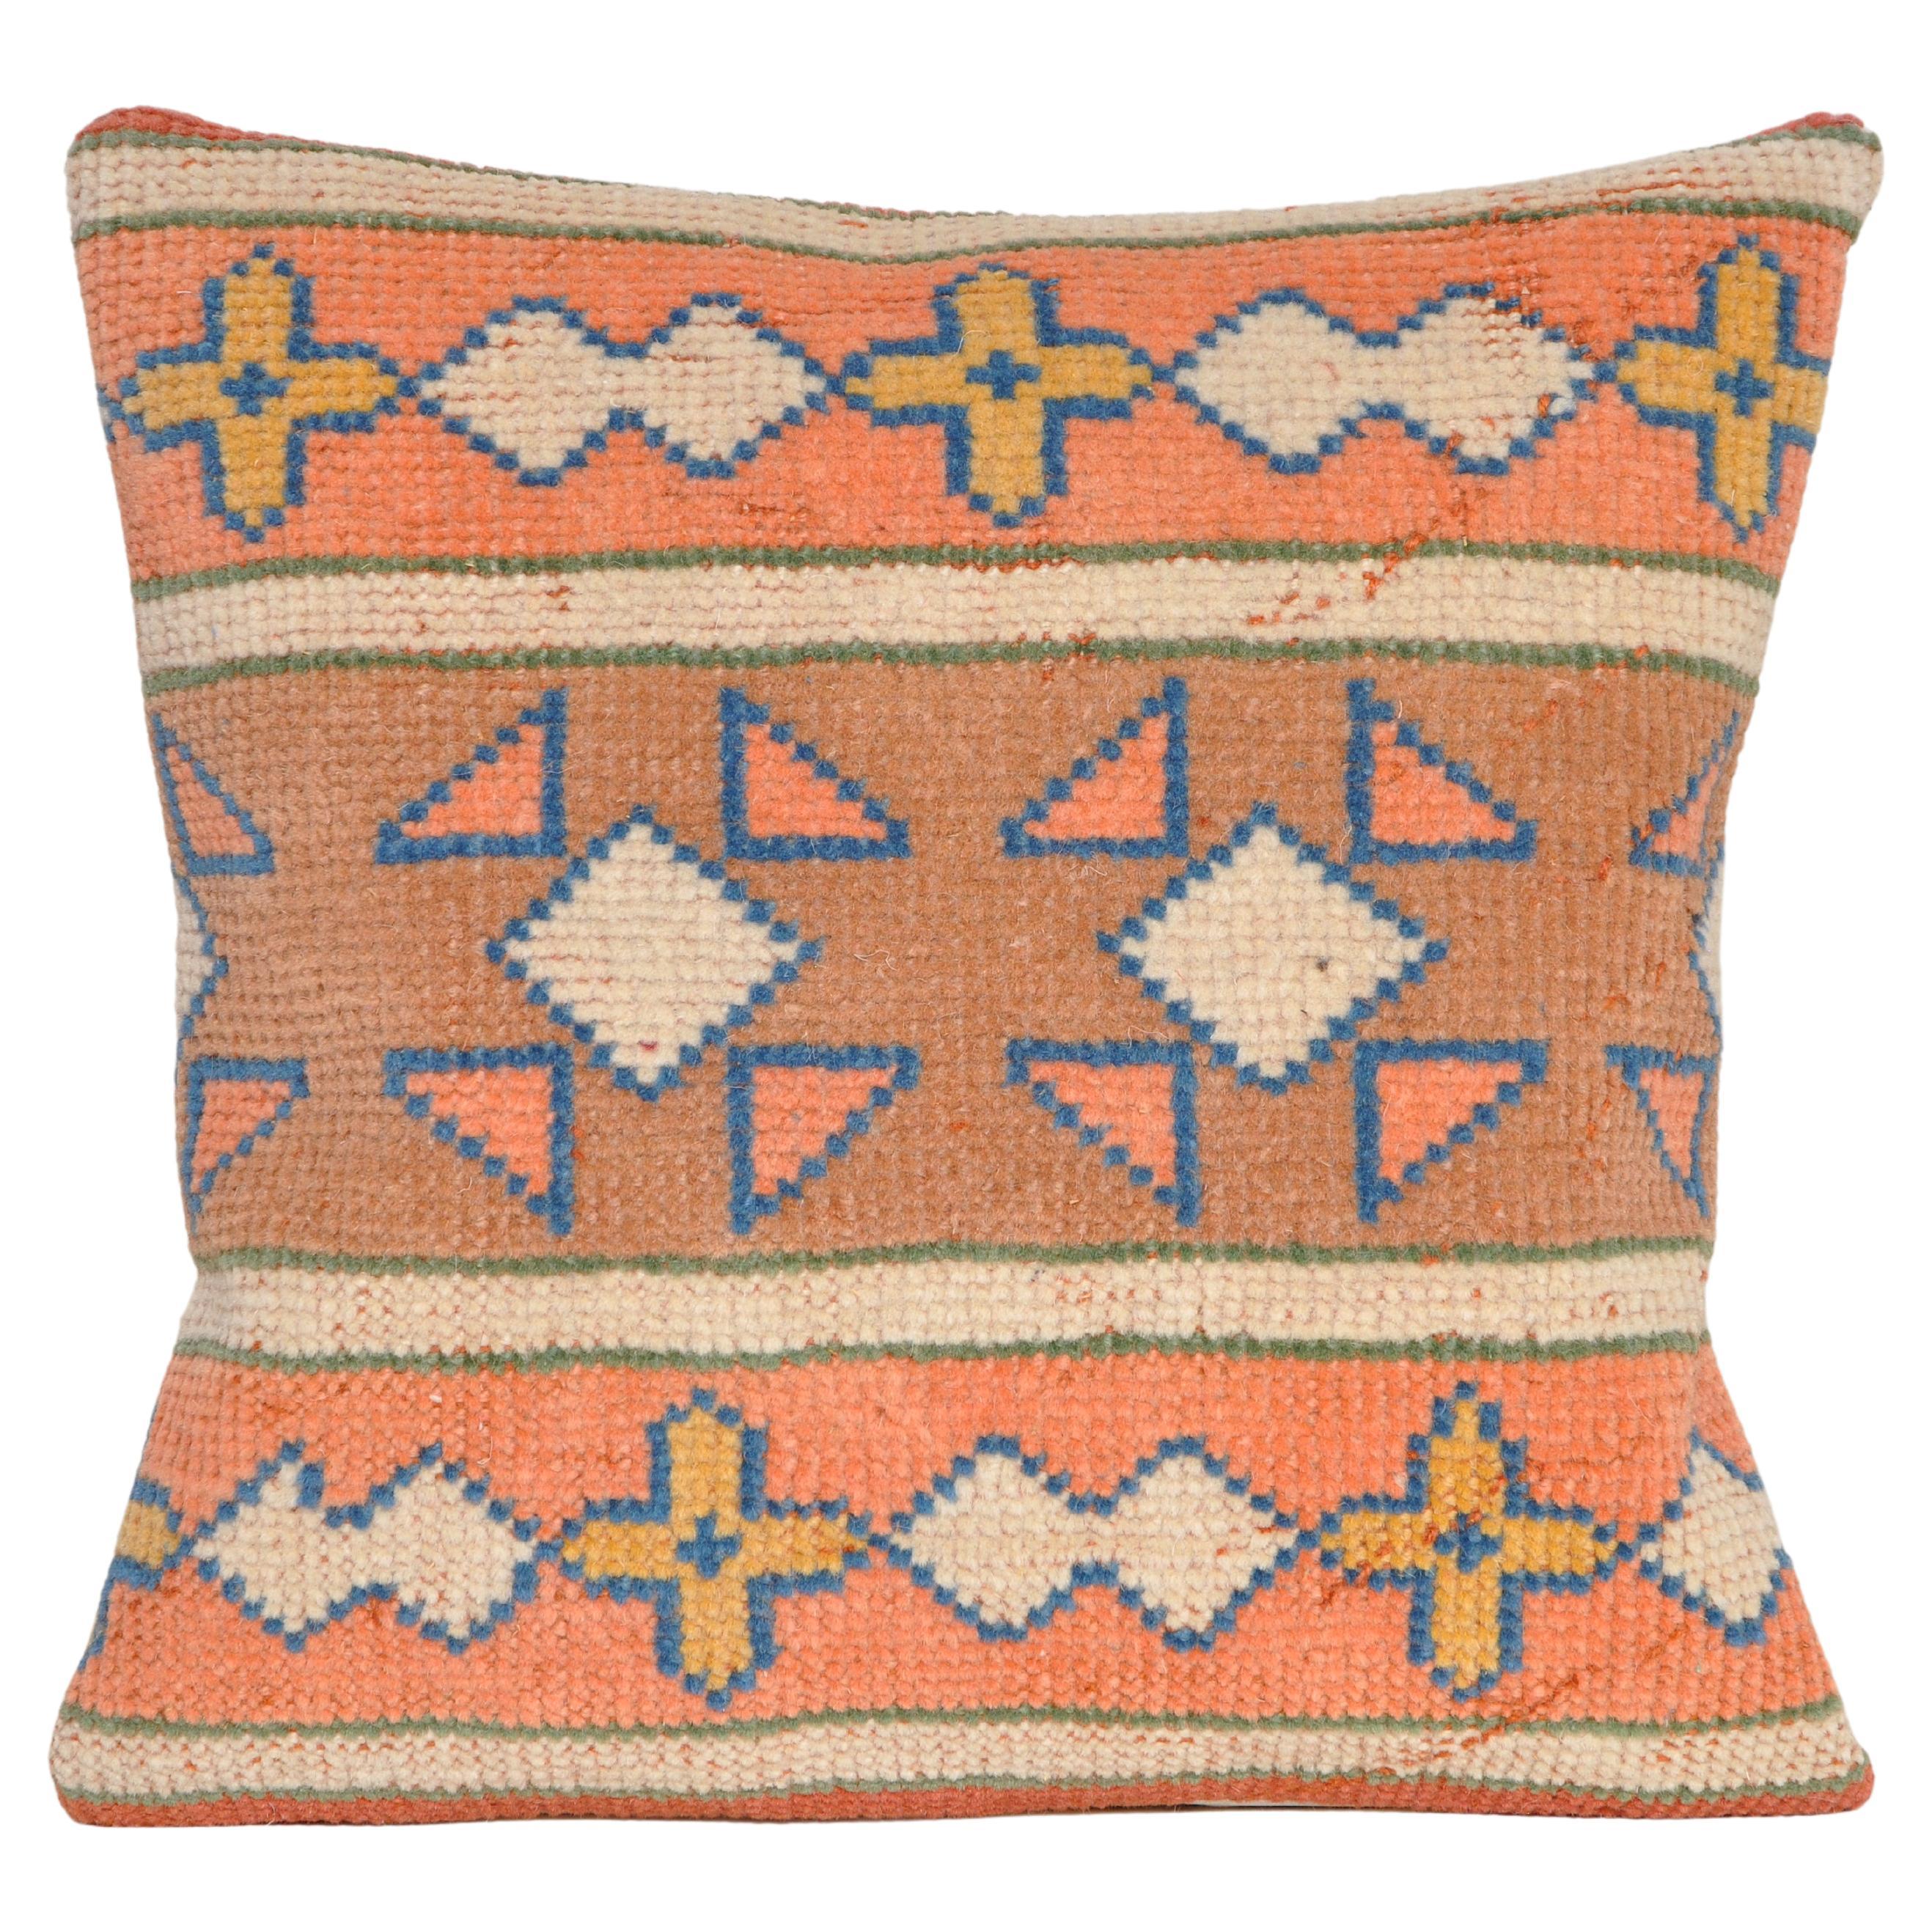 Vintage Kilim Rug Pillow with Irish Linen by Katie Larmour Cushions Peach